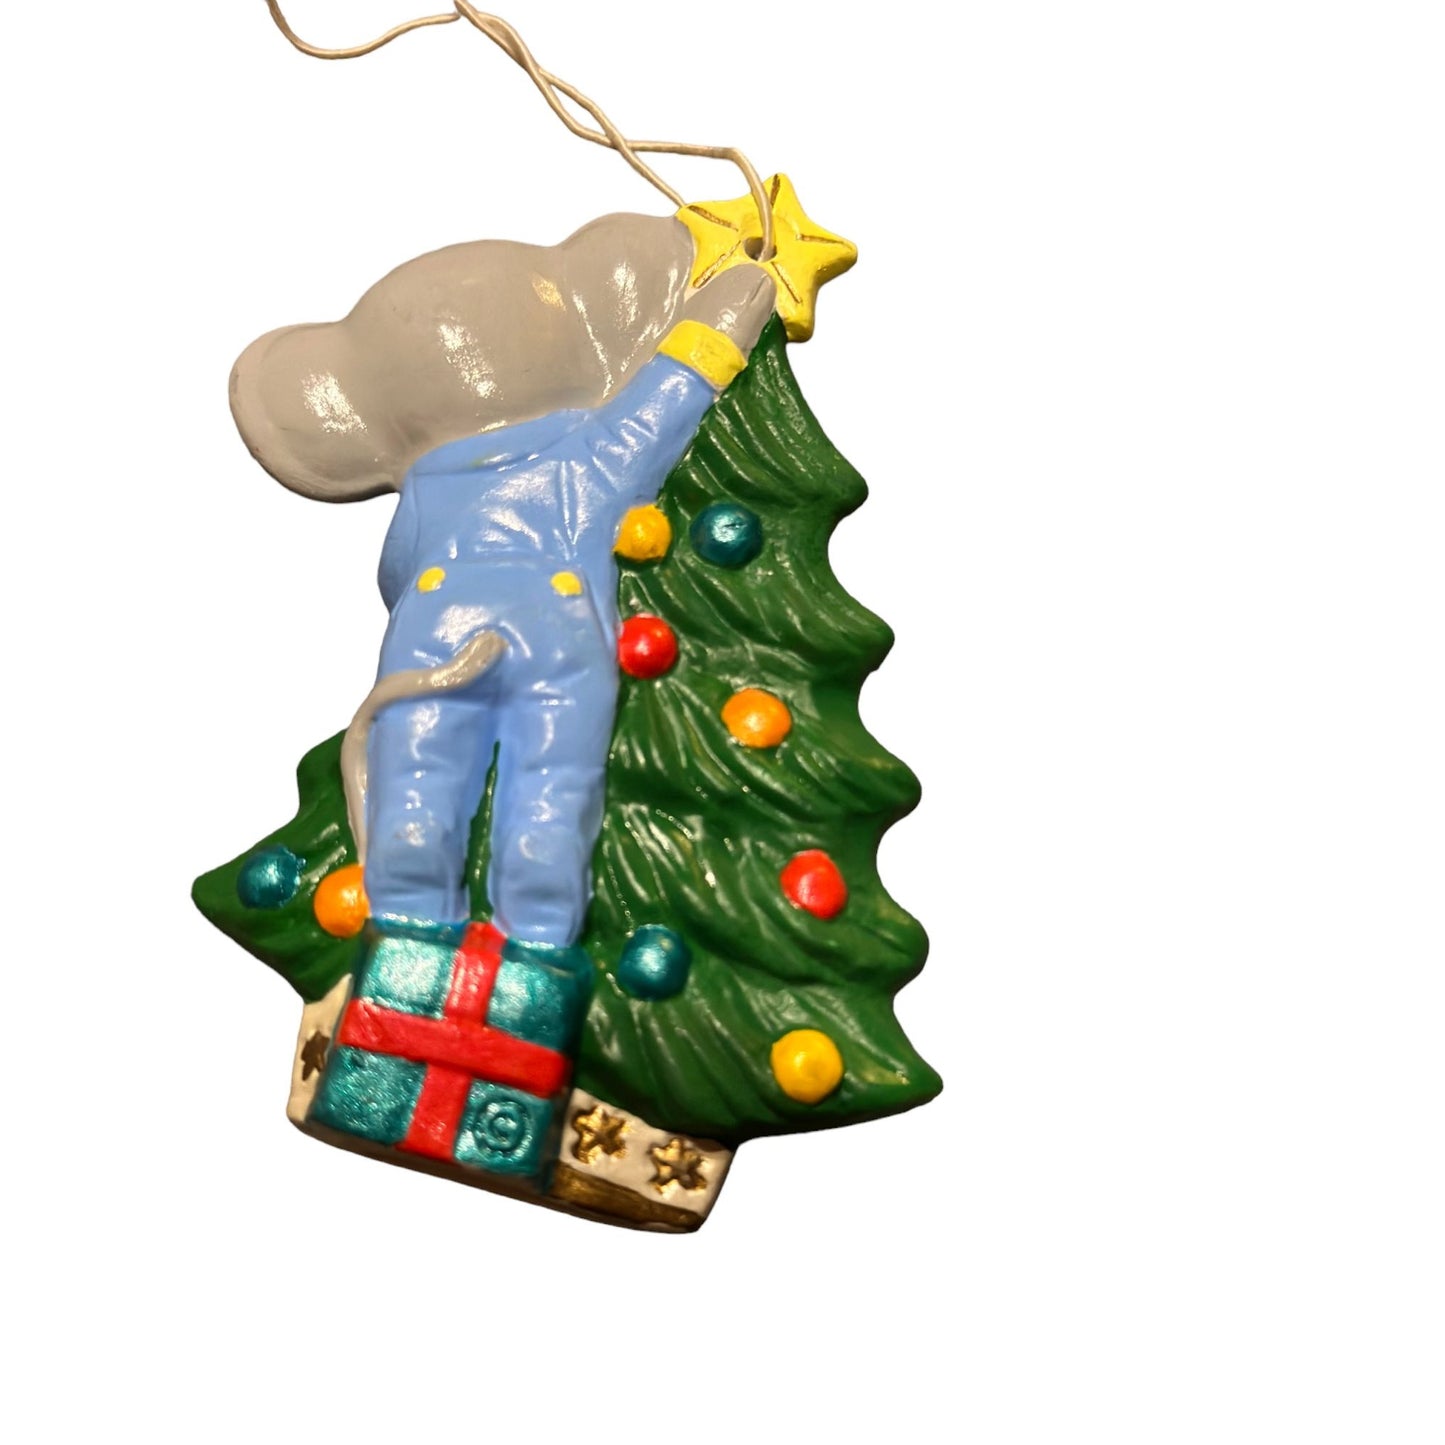 Vintage Alberta's Ceramic Mouse Tree Holiday Christmas Ornament Charming Collectible Decoration